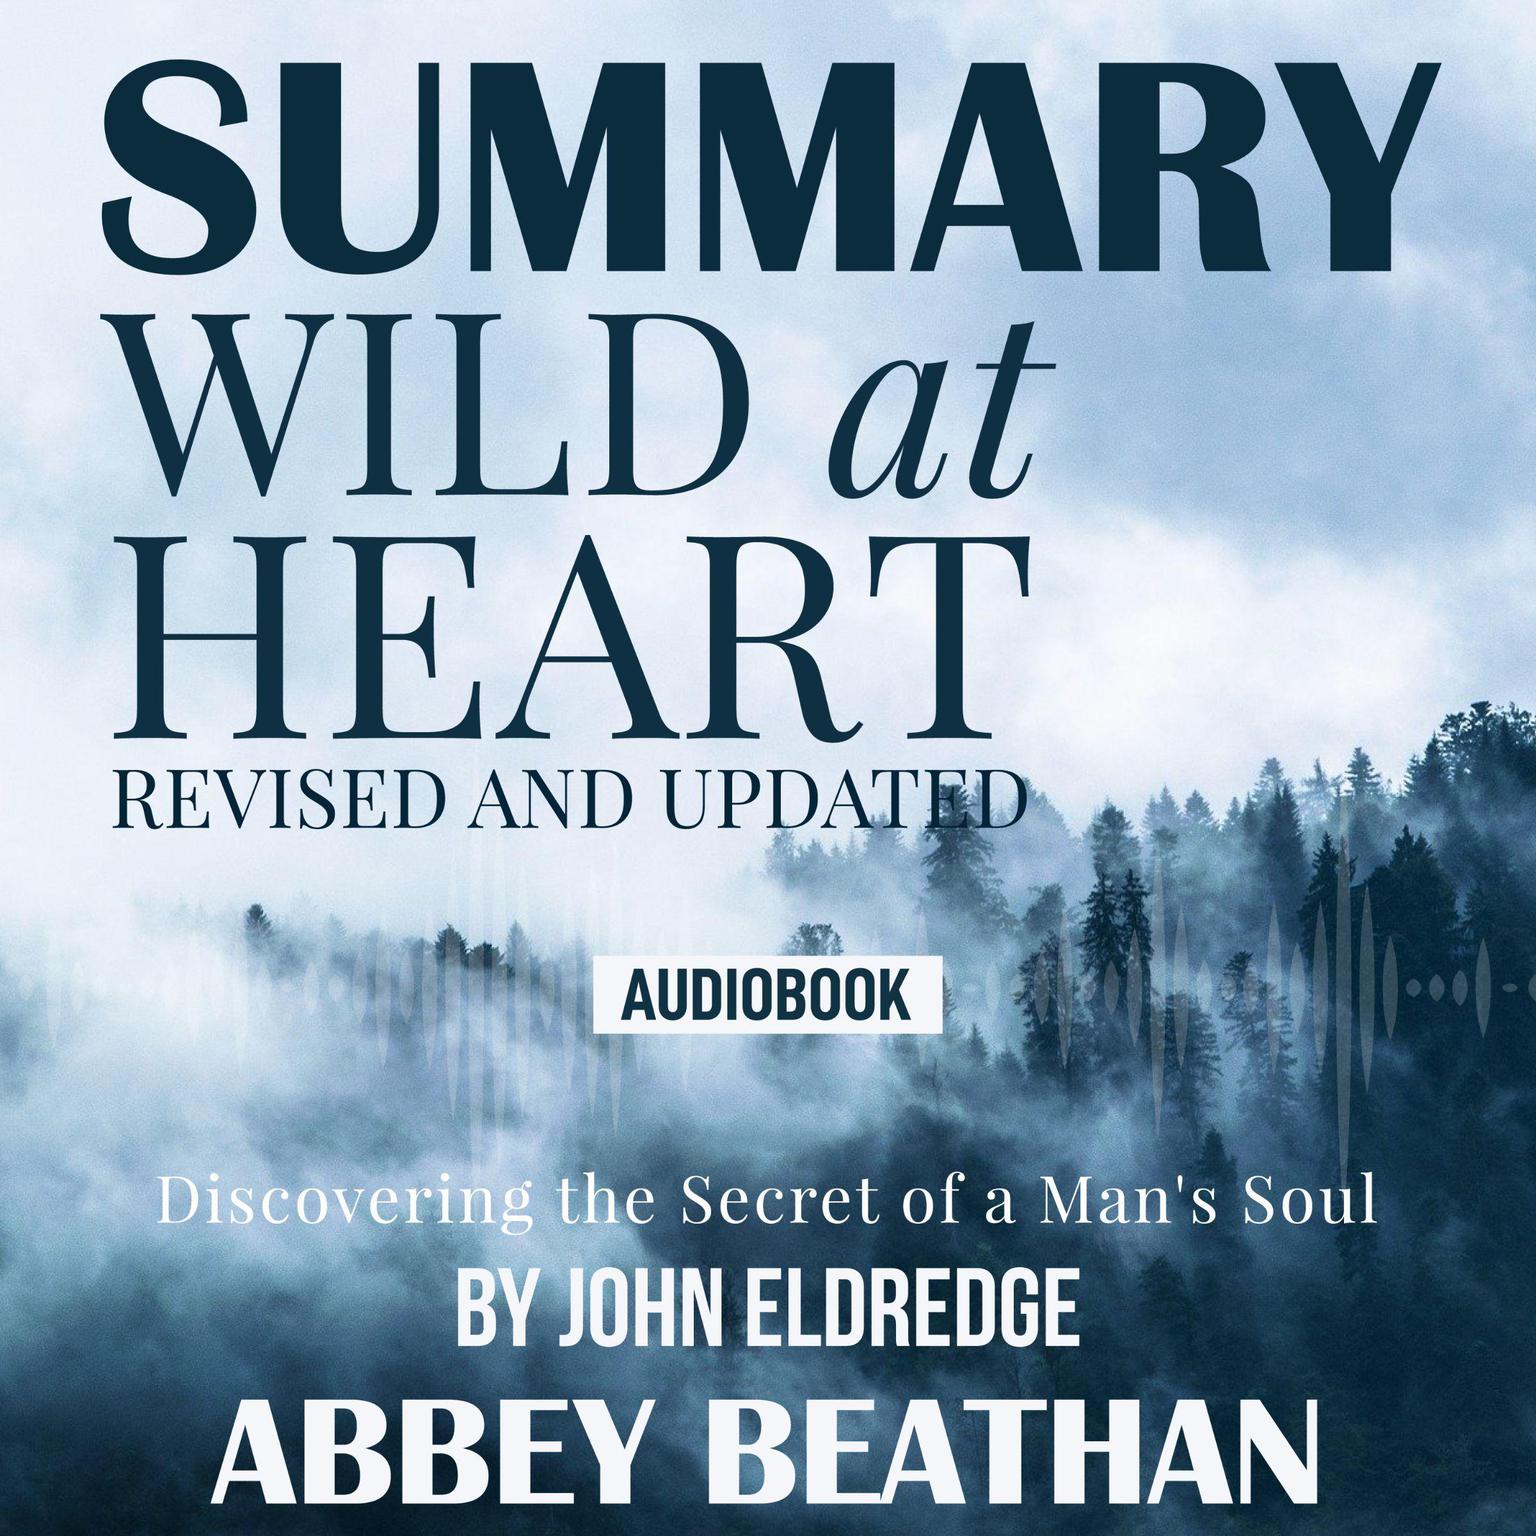 Summary of Wild at Heart Revised and Updated: Discovering the Secret of a Mans Soul by John Eldredge Audiobook, by Abbey Beathan